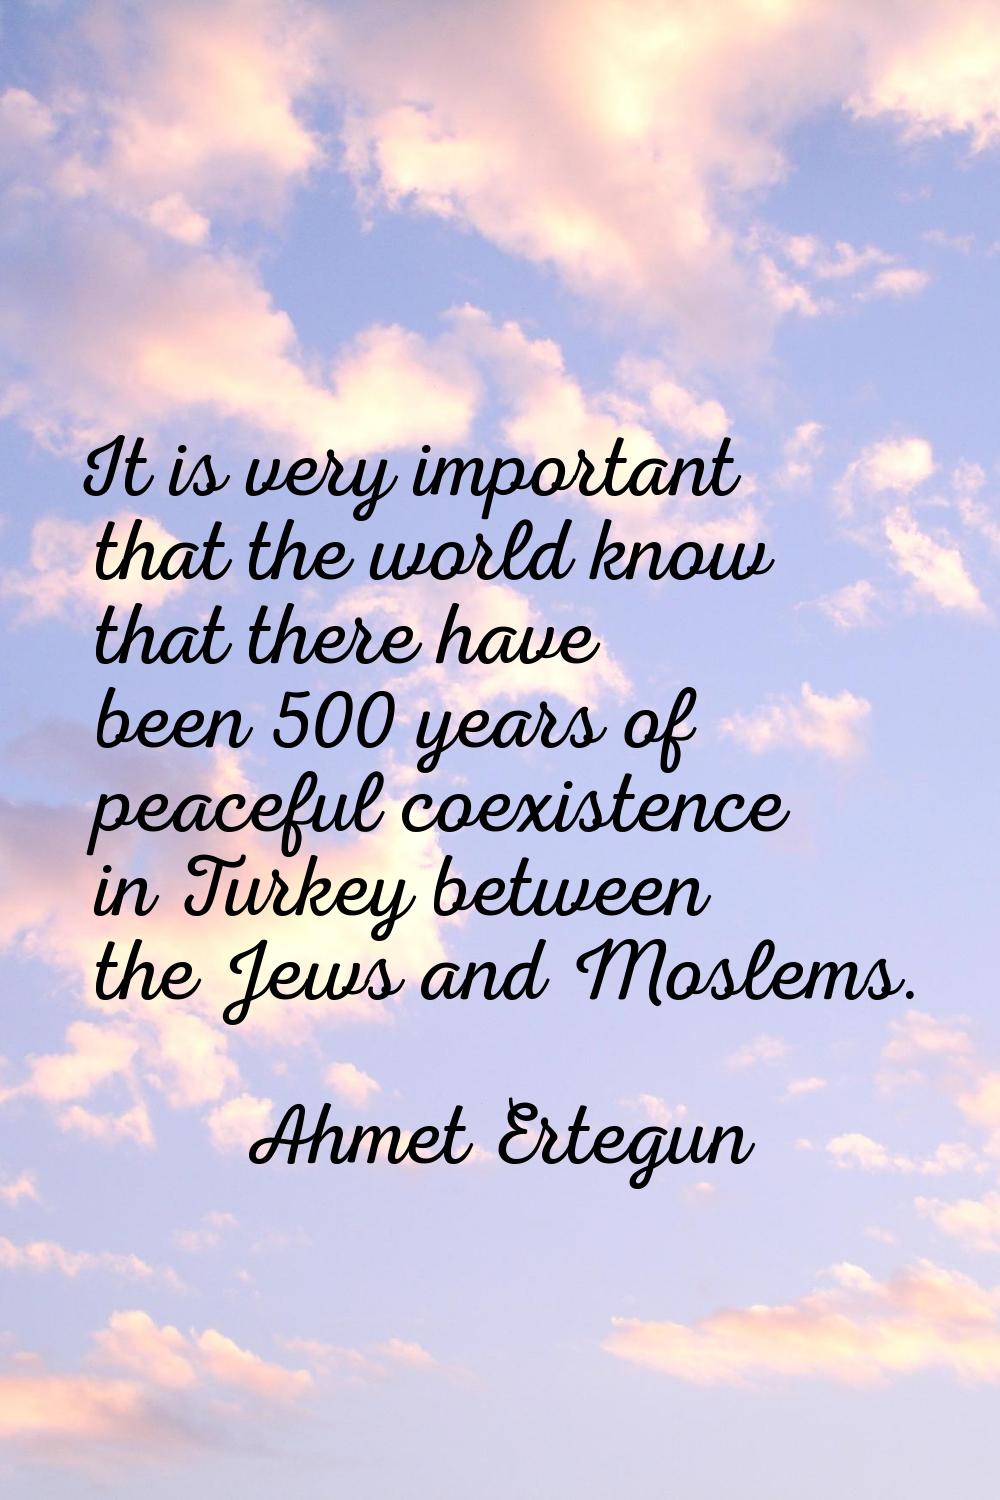 It is very important that the world know that there have been 500 years of peaceful coexistence in 